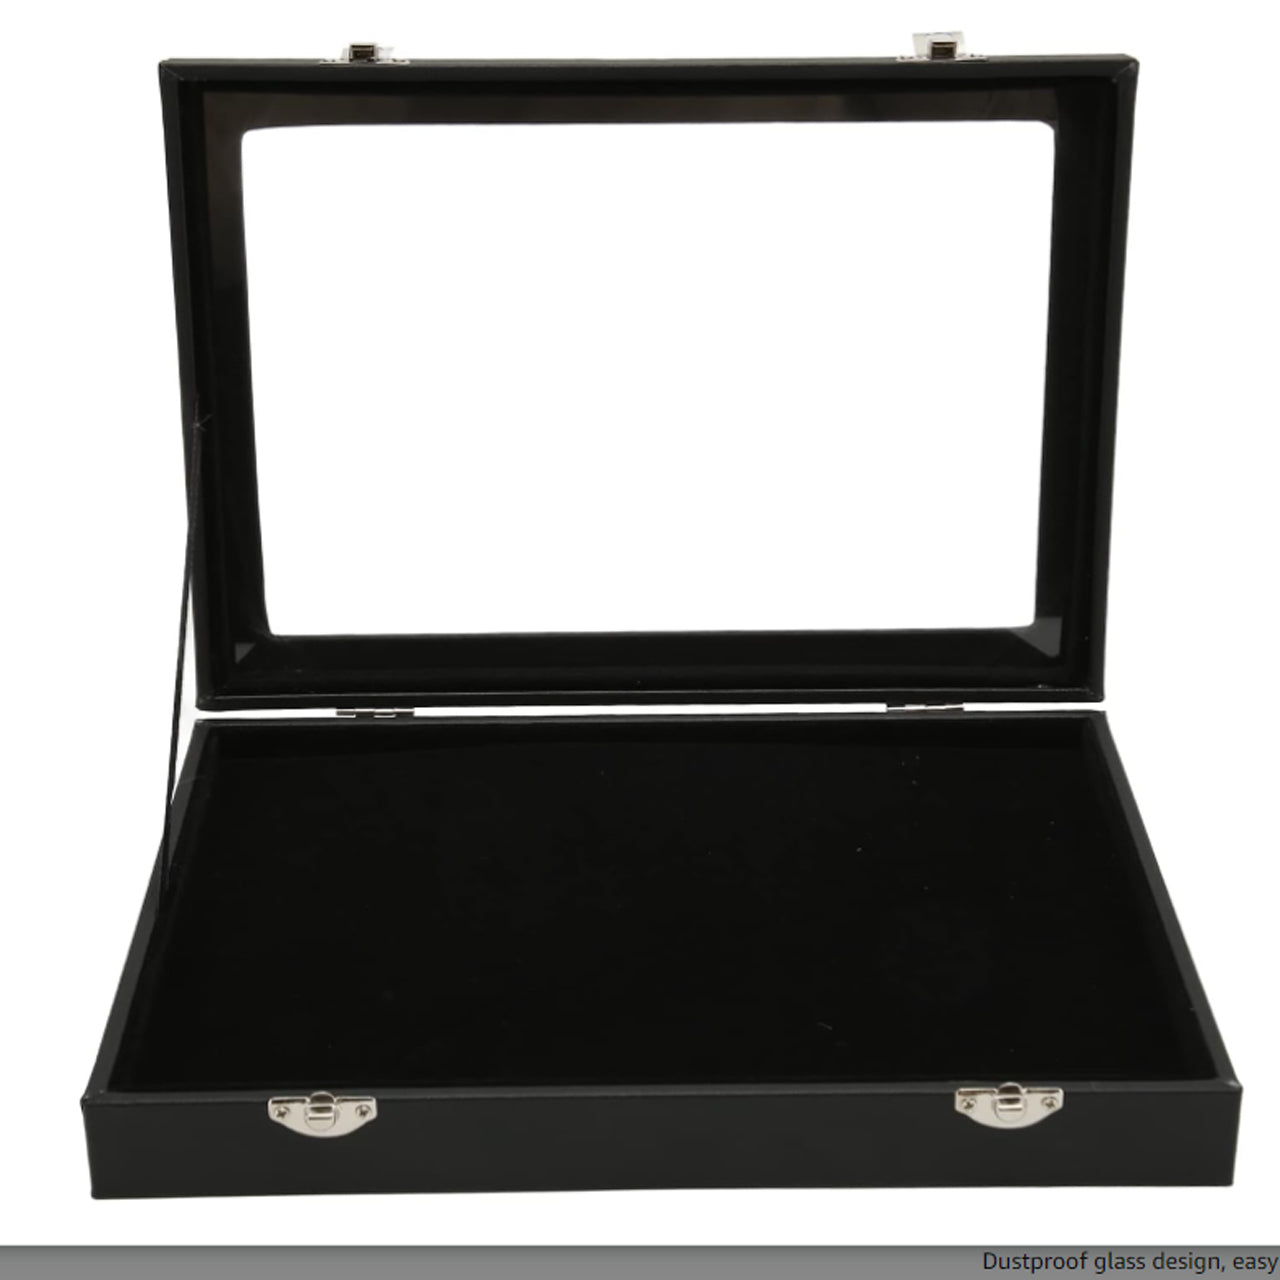 Our Dustproof Display Case organizer is lined with a sponge layer that is flexible and also prevents scratching of your collection, providing total protection. Make sure your medals, lapel pins and badges won't fade over time. Dimensions: Small 20x15x4.8cm Medium 28x20x5cm Large 35x24x5cm www.defenceqstore.com.au